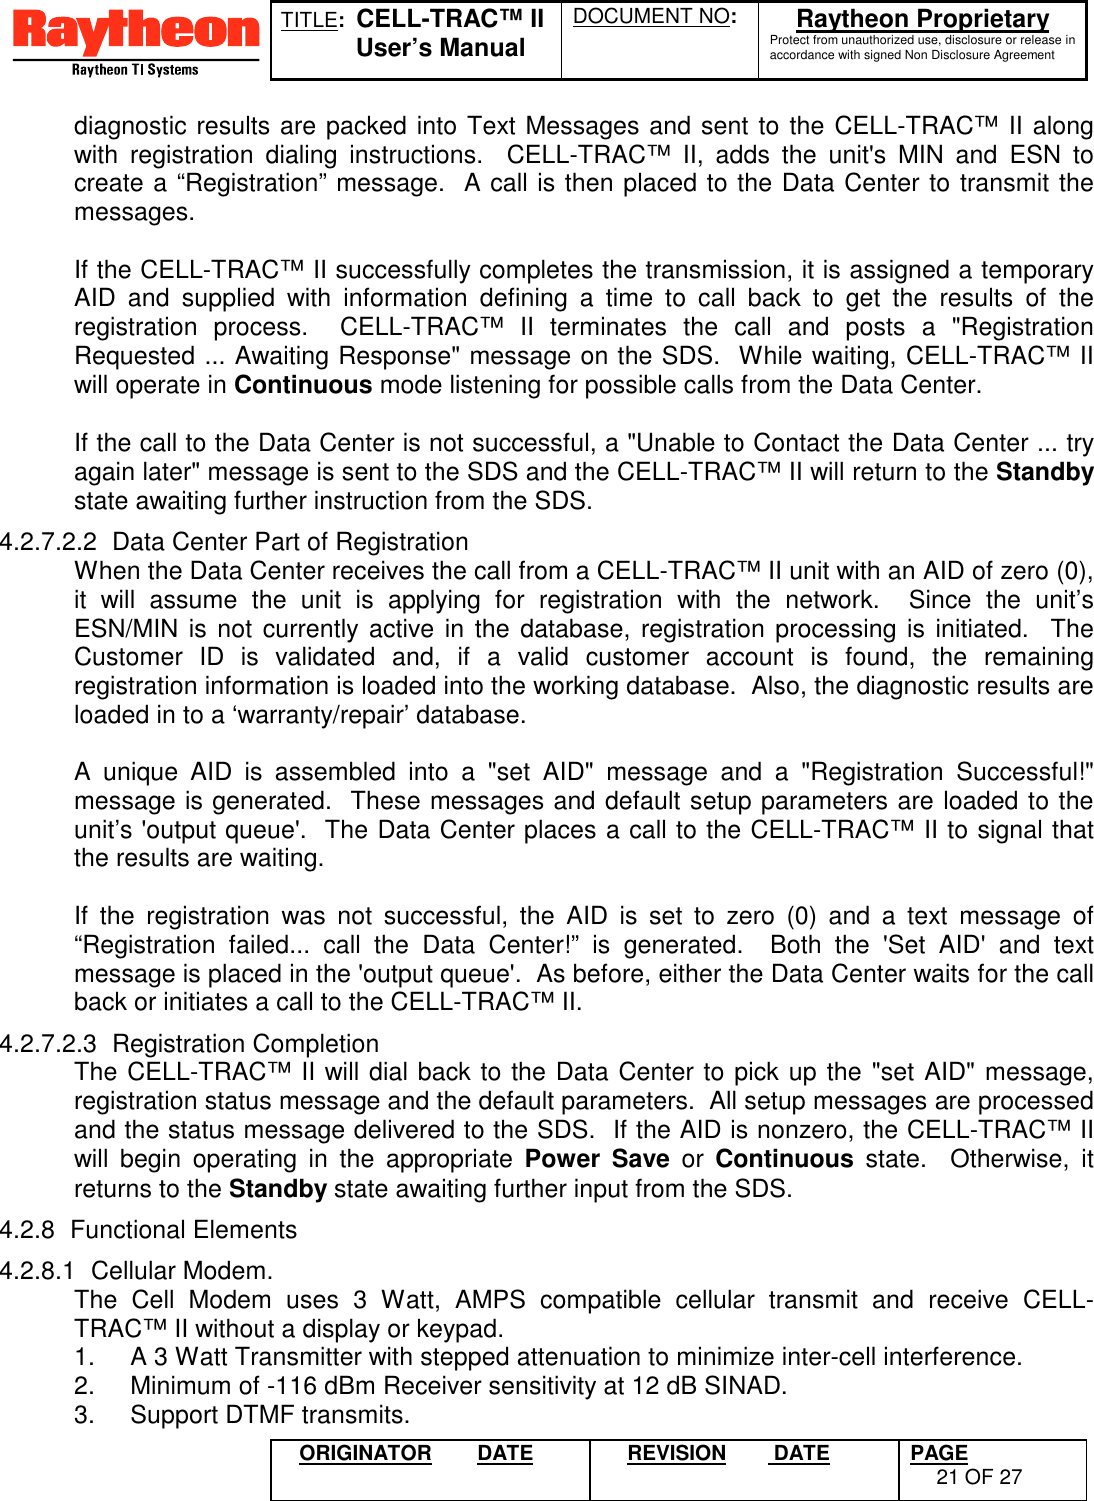 TITLE:  CELL-TRAC™ IIUser’s ManualDOCUMENT NO: Raytheon ProprietaryProtect from unauthorized use, disclosure or release inaccordance with signed Non Disclosure AgreementORIGINATOR DATE REVISION  DATE PAGE21 OF 27diagnostic results are packed into Text Messages and sent to the CELL-TRAC™ II alongwith registration dialing instructions.  CELL-TRAC™ II, adds the unit&apos;s MIN and ESN tocreate a “Registration” message.  A call is then placed to the Data Center to transmit themessages.If the CELL-TRAC™ II successfully completes the transmission, it is assigned a temporaryAID and supplied with information defining a time to call back to get the results of theregistration process.  CELL-TRAC™ II terminates the call and posts a &quot;RegistrationRequested ... Awaiting Response&quot; message on the SDS.  While waiting, CELL-TRAC™ IIwill operate in Continuous mode listening for possible calls from the Data Center.If the call to the Data Center is not successful, a &quot;Unable to Contact the Data Center ... tryagain later&quot; message is sent to the SDS and the CELL-TRAC™ II will return to the Standbystate awaiting further instruction from the SDS.4.2.7.2.2  Data Center Part of RegistrationWhen the Data Center receives the call from a CELL-TRAC™ II unit with an AID of zero (0),it will assume the unit is applying for registration with the network.  Since the unit’sESN/MIN is not currently active in the database, registration processing is initiated.  TheCustomer ID is validated and, if a valid customer account is found, the remainingregistration information is loaded into the working database.  Also, the diagnostic results areloaded in to a ‘warranty/repair’ database.A unique AID is assembled into a &quot;set AID&quot; message and a &quot;Registration Successful!&quot;message is generated.  These messages and default setup parameters are loaded to theunit’s &apos;output queue&apos;.  The Data Center places a call to the CELL-TRAC™ II to signal thatthe results are waiting.If the registration was not successful, the AID is set to zero (0) and a text message of“Registration failed... call the Data Center!” is generated.  Both the &apos;Set AID&apos; and textmessage is placed in the &apos;output queue&apos;.  As before, either the Data Center waits for the callback or initiates a call to the CELL-TRAC™ II.4.2.7.2.3 Registration CompletionThe CELL-TRAC™ II will dial back to the Data Center to pick up the &quot;set AID&quot; message,registration status message and the default parameters.  All setup messages are processedand the status message delivered to the SDS.  If the AID is nonzero, the CELL-TRAC™ IIwill begin operating in the appropriate Power Save or Continuous state.  Otherwise, itreturns to the Standby state awaiting further input from the SDS.4.2.8 Functional Elements4.2.8.1 Cellular Modem.The Cell Modem uses 3 Watt, AMPS compatible cellular transmit and receive CELL-TRAC™ II without a display or keypad.1.  A 3 Watt Transmitter with stepped attenuation to minimize inter-cell interference.2.  Minimum of -116 dBm Receiver sensitivity at 12 dB SINAD.3.  Support DTMF transmits.